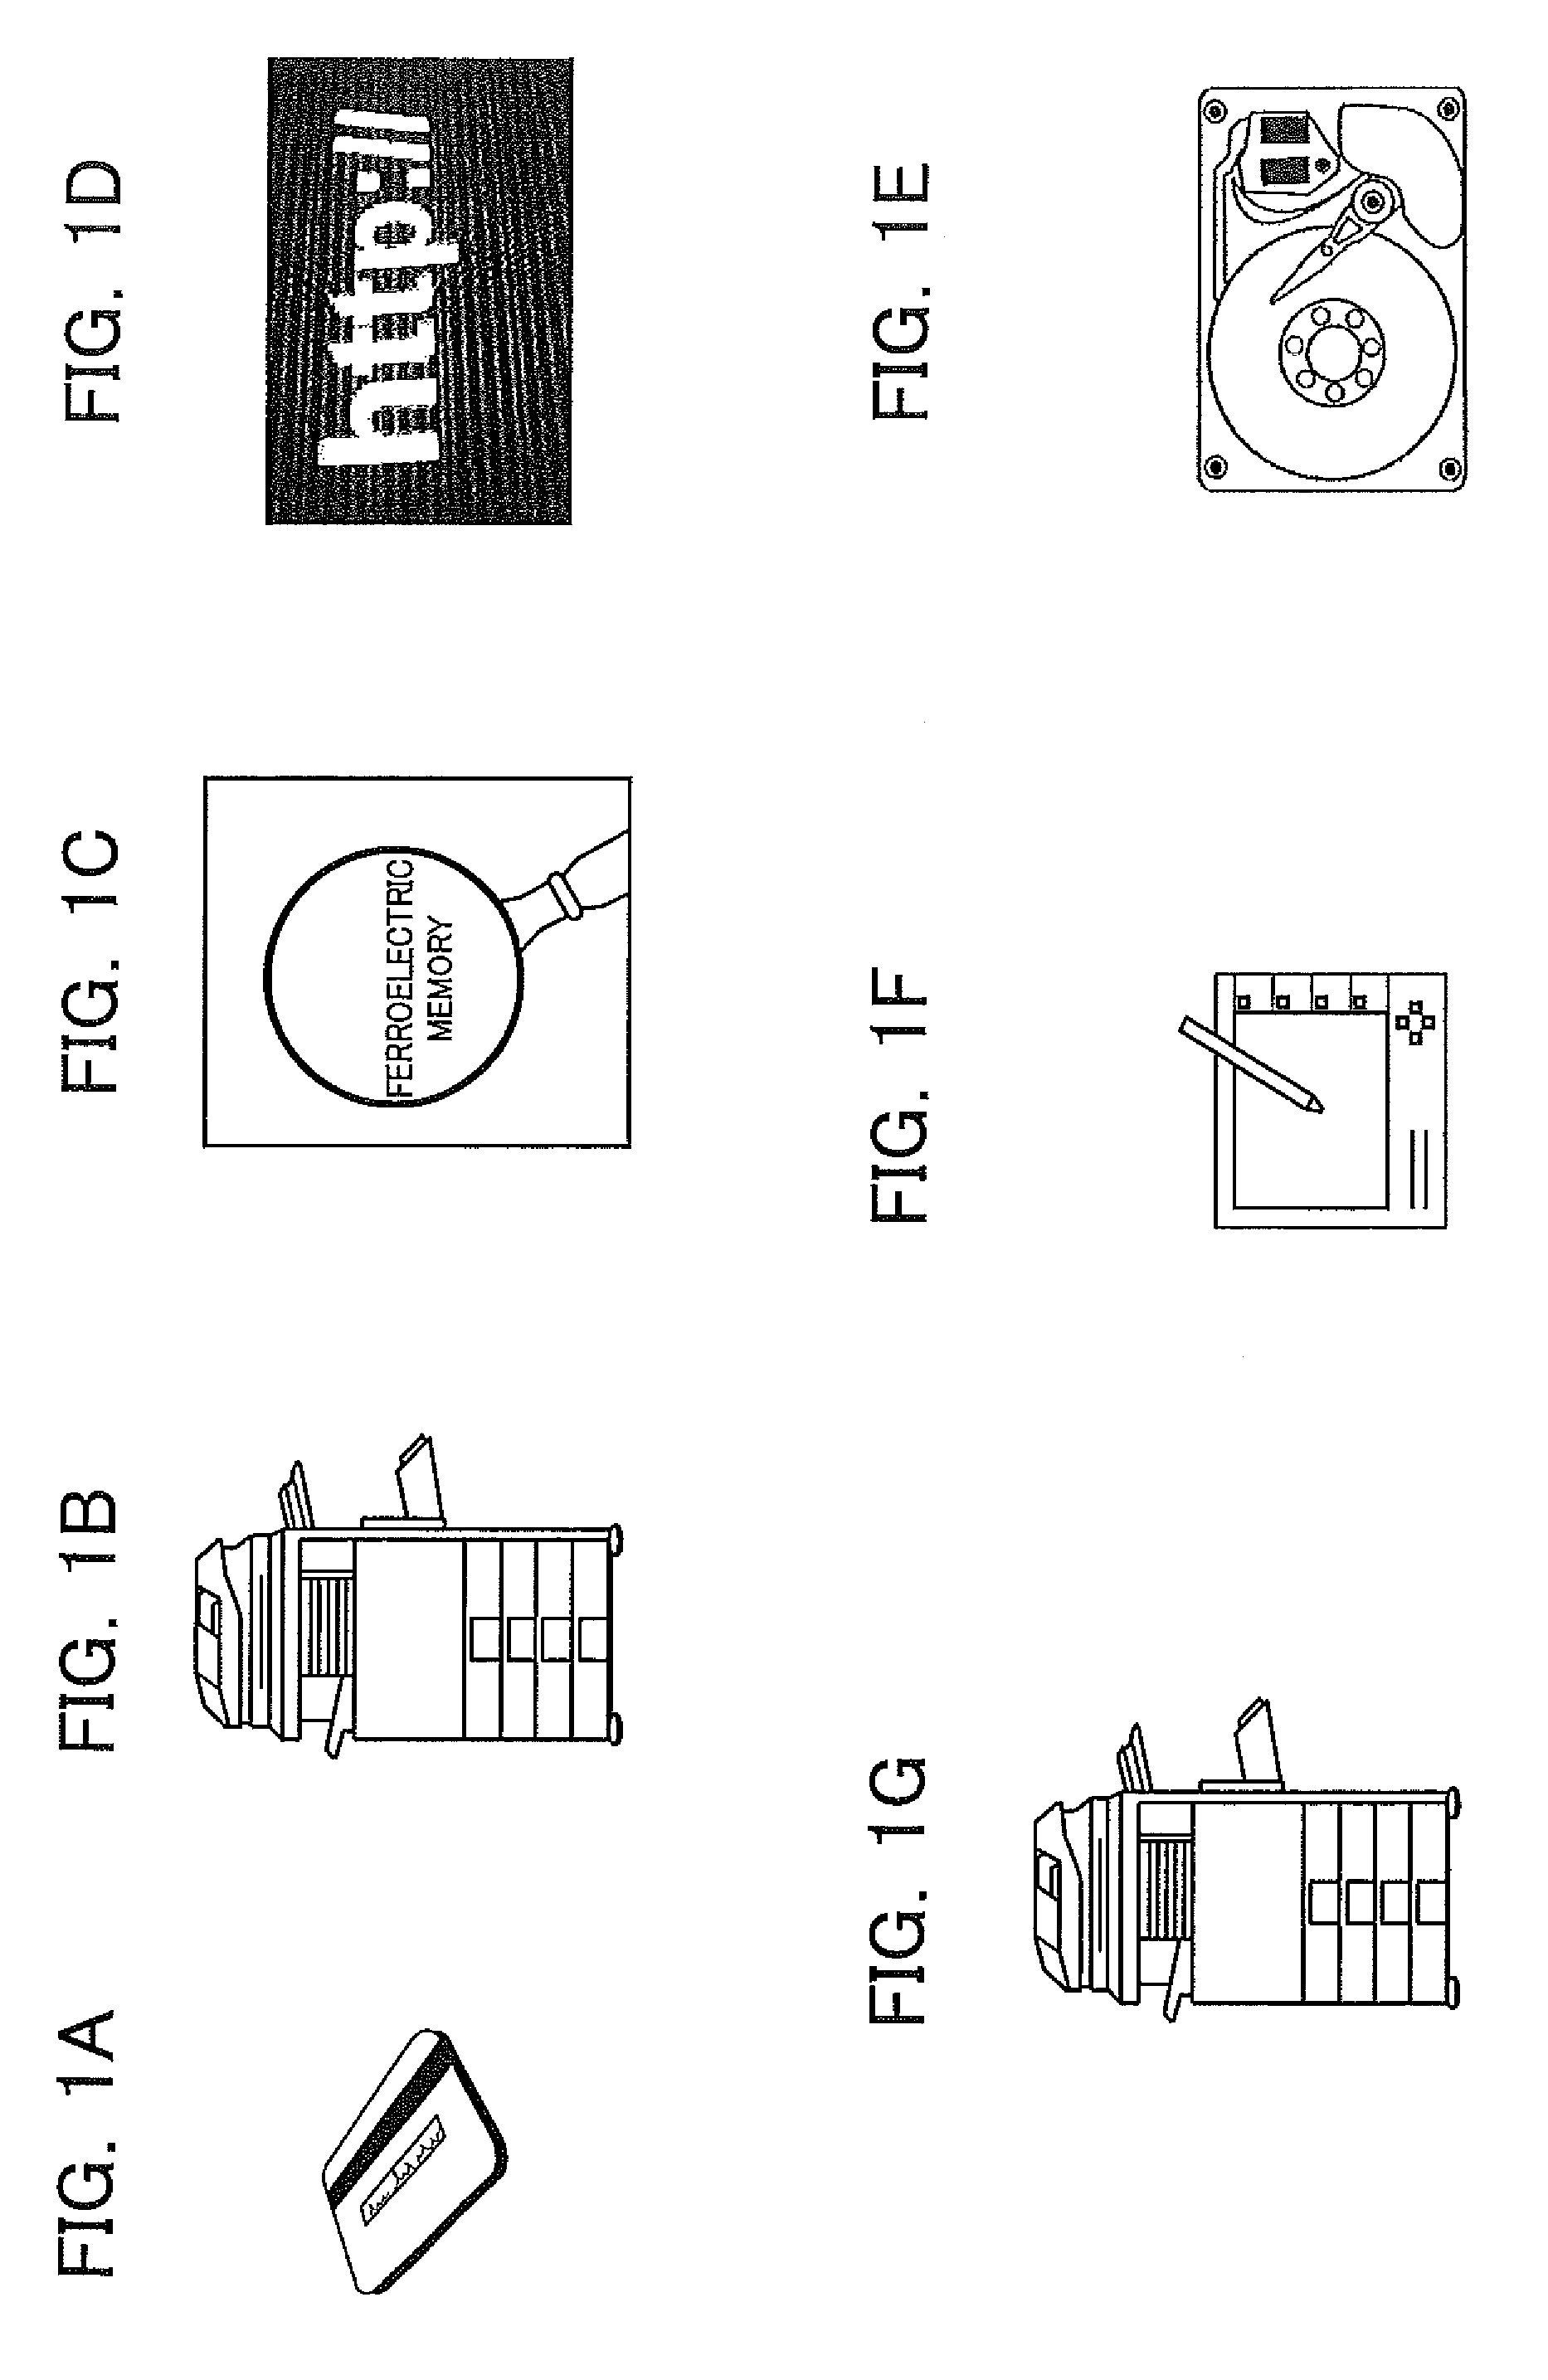 Image forming apparatus for identifying an unknown term in a document